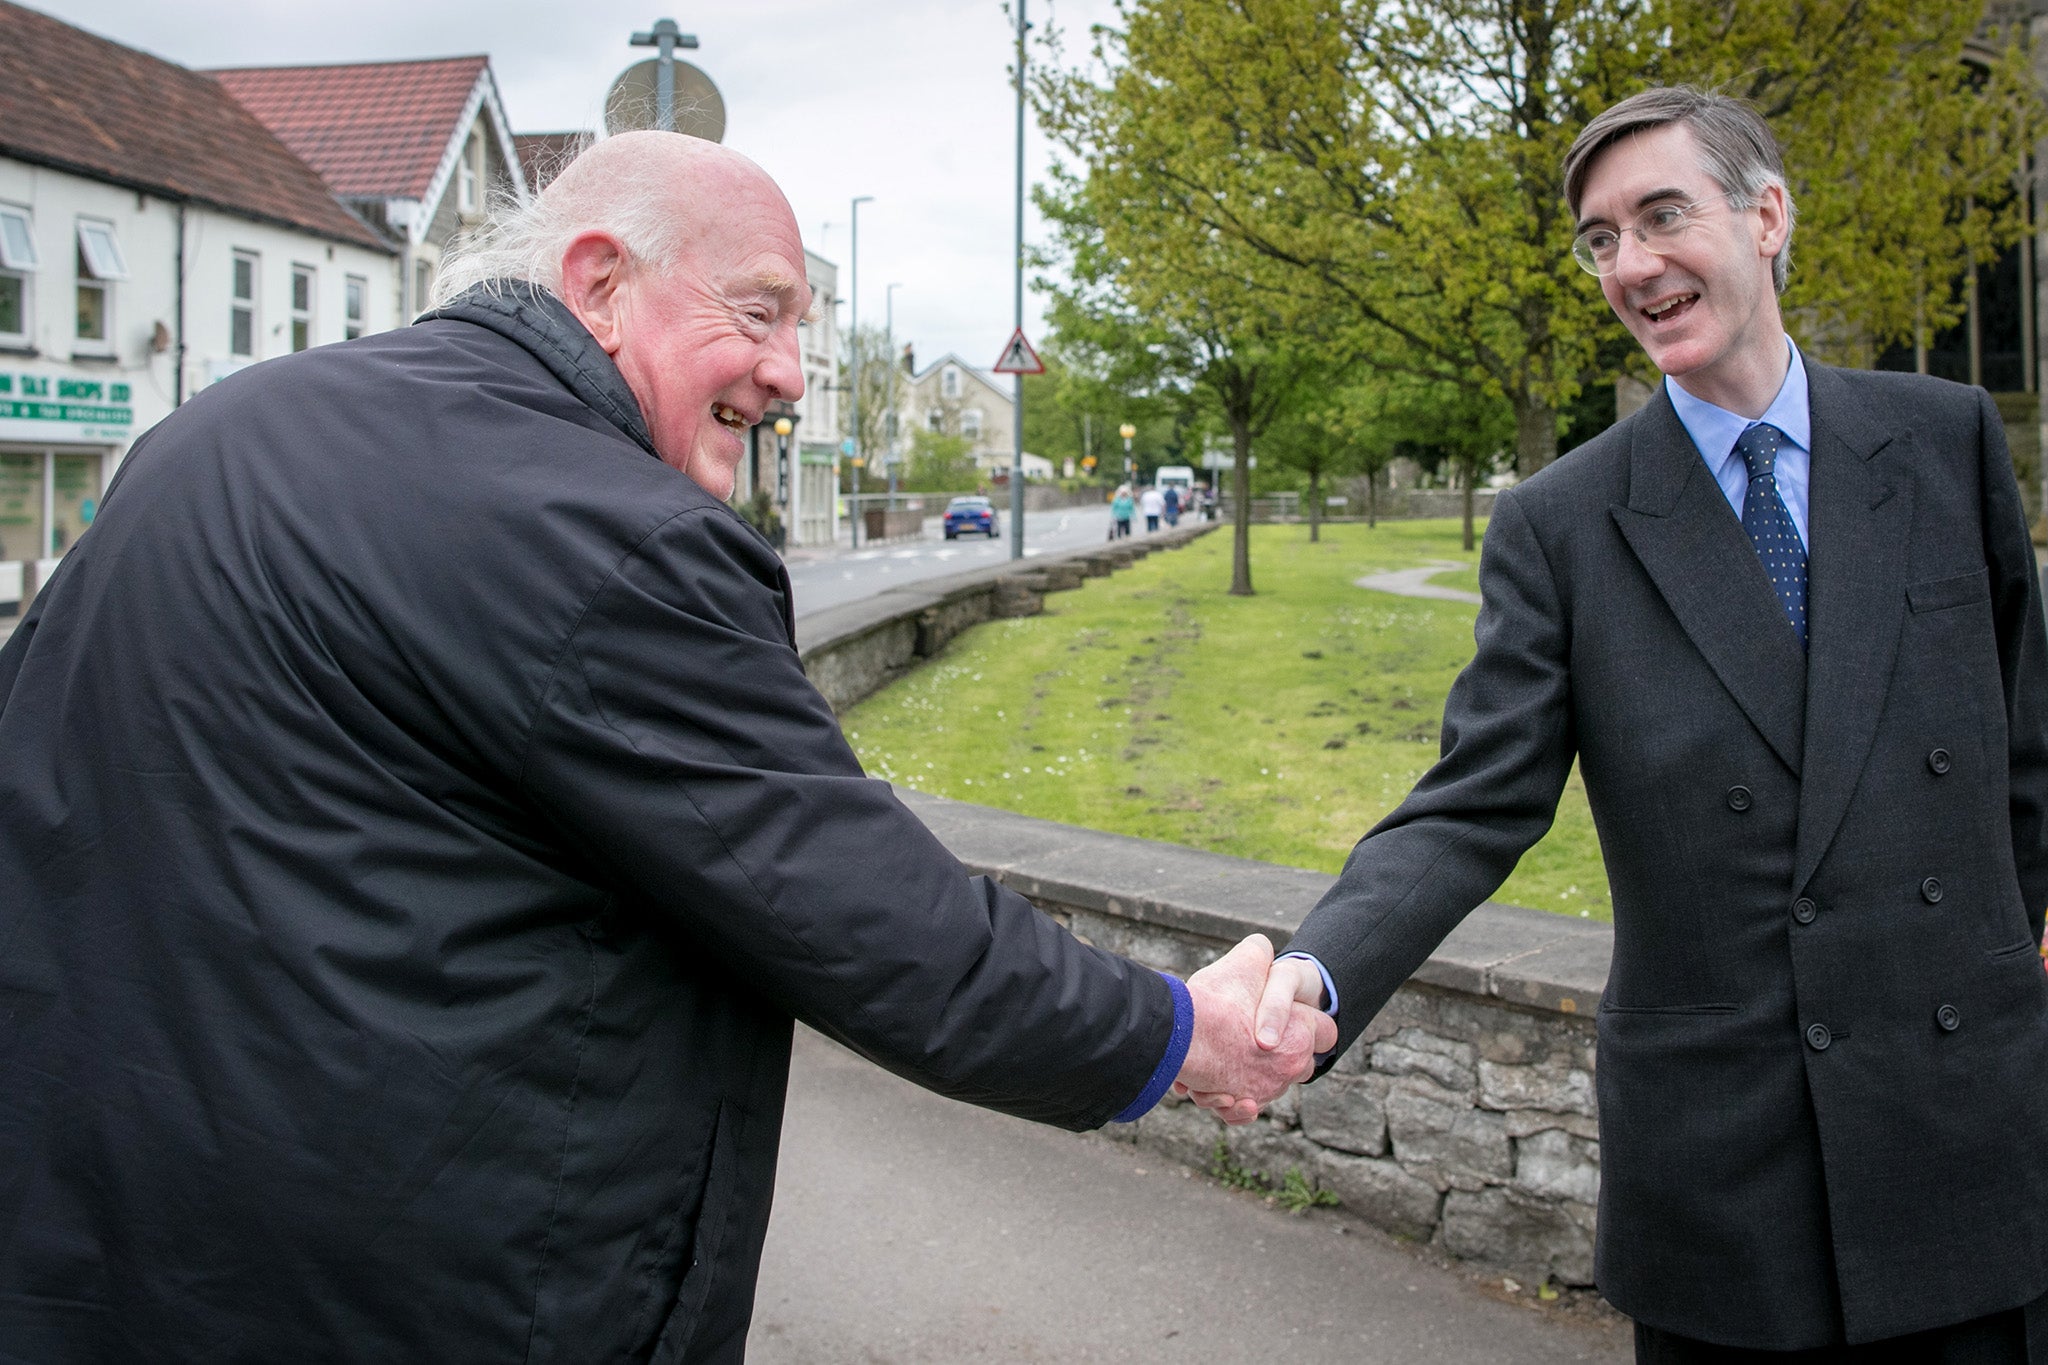 Meeting the public: Conservative MP Jacob Rees-Mogg stops to talk to people near his constituency office in Keynsham, Somerset